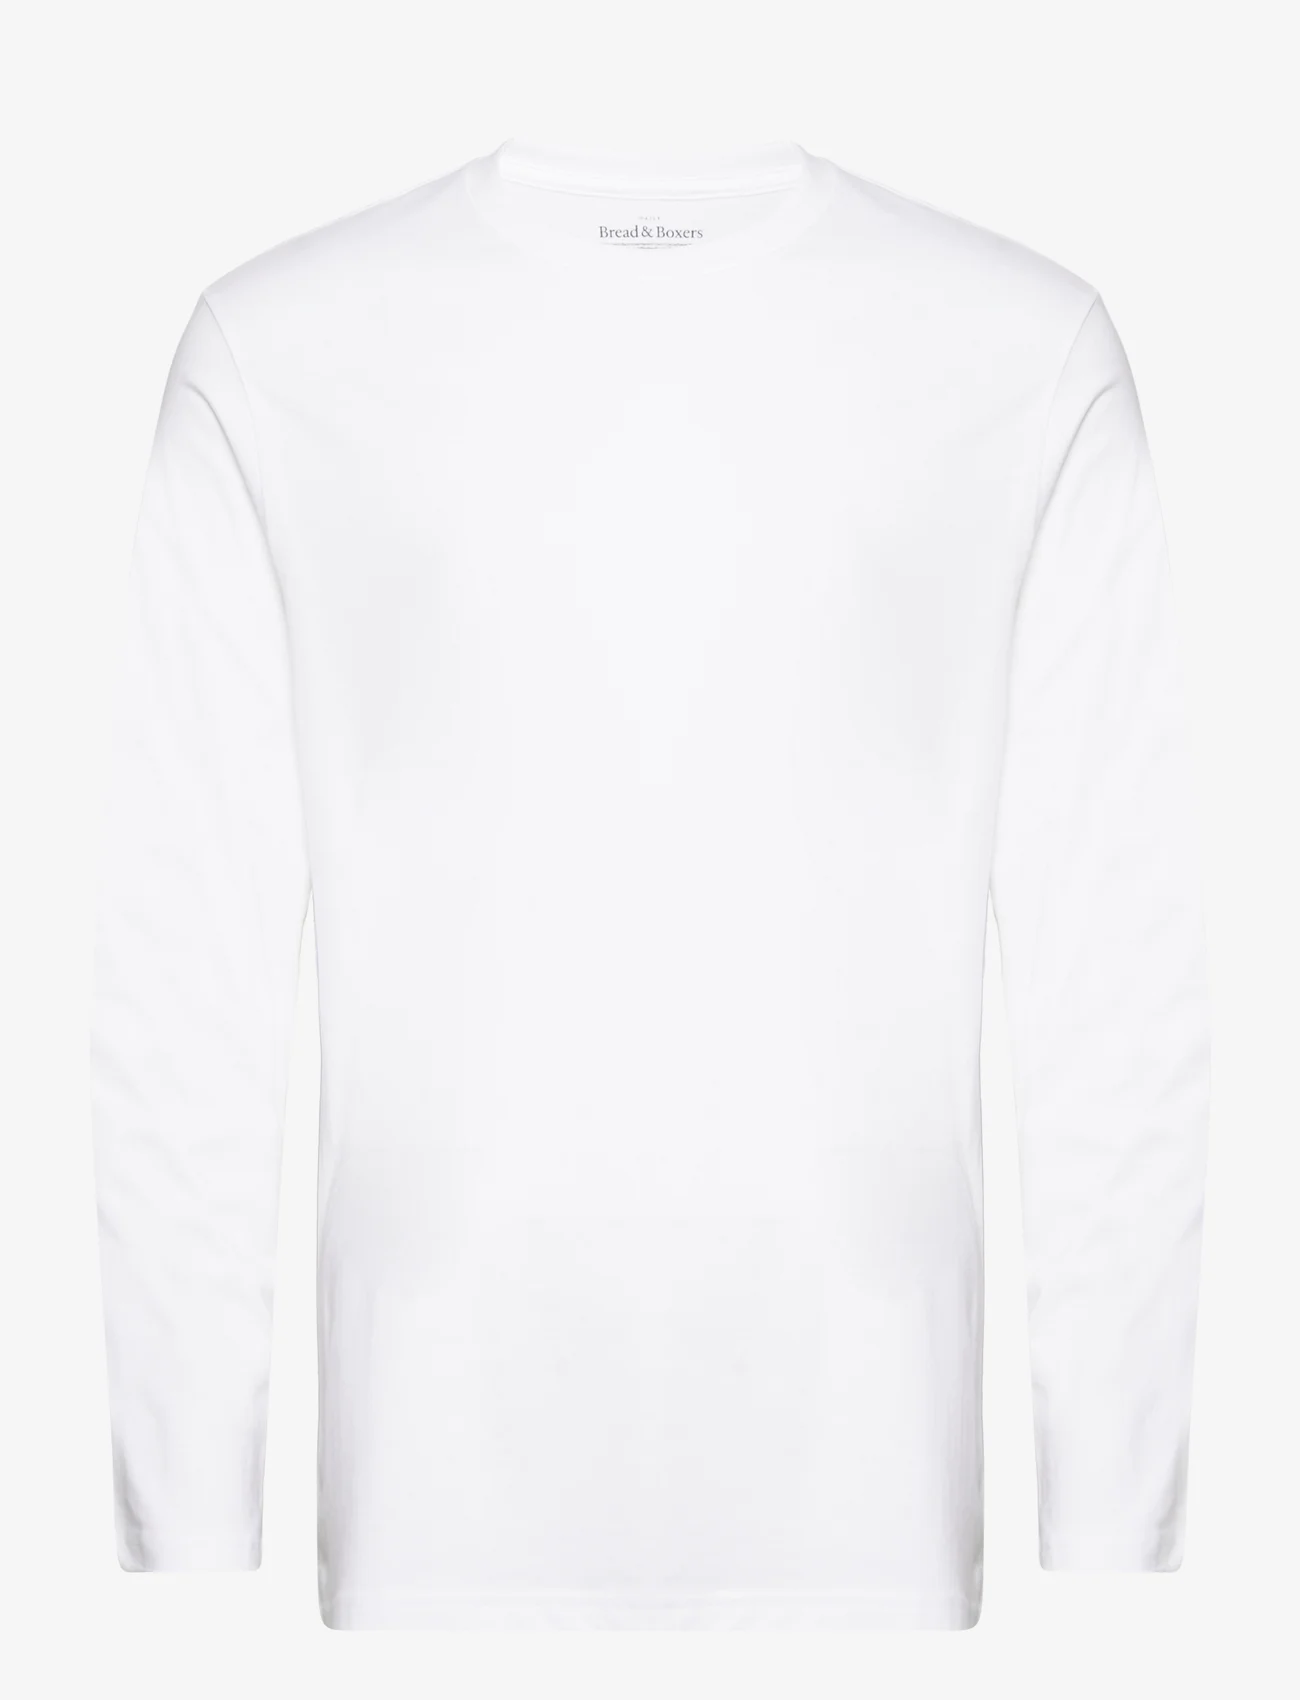 Bread & Boxers - Long sleeve - t-shirts - white - 0